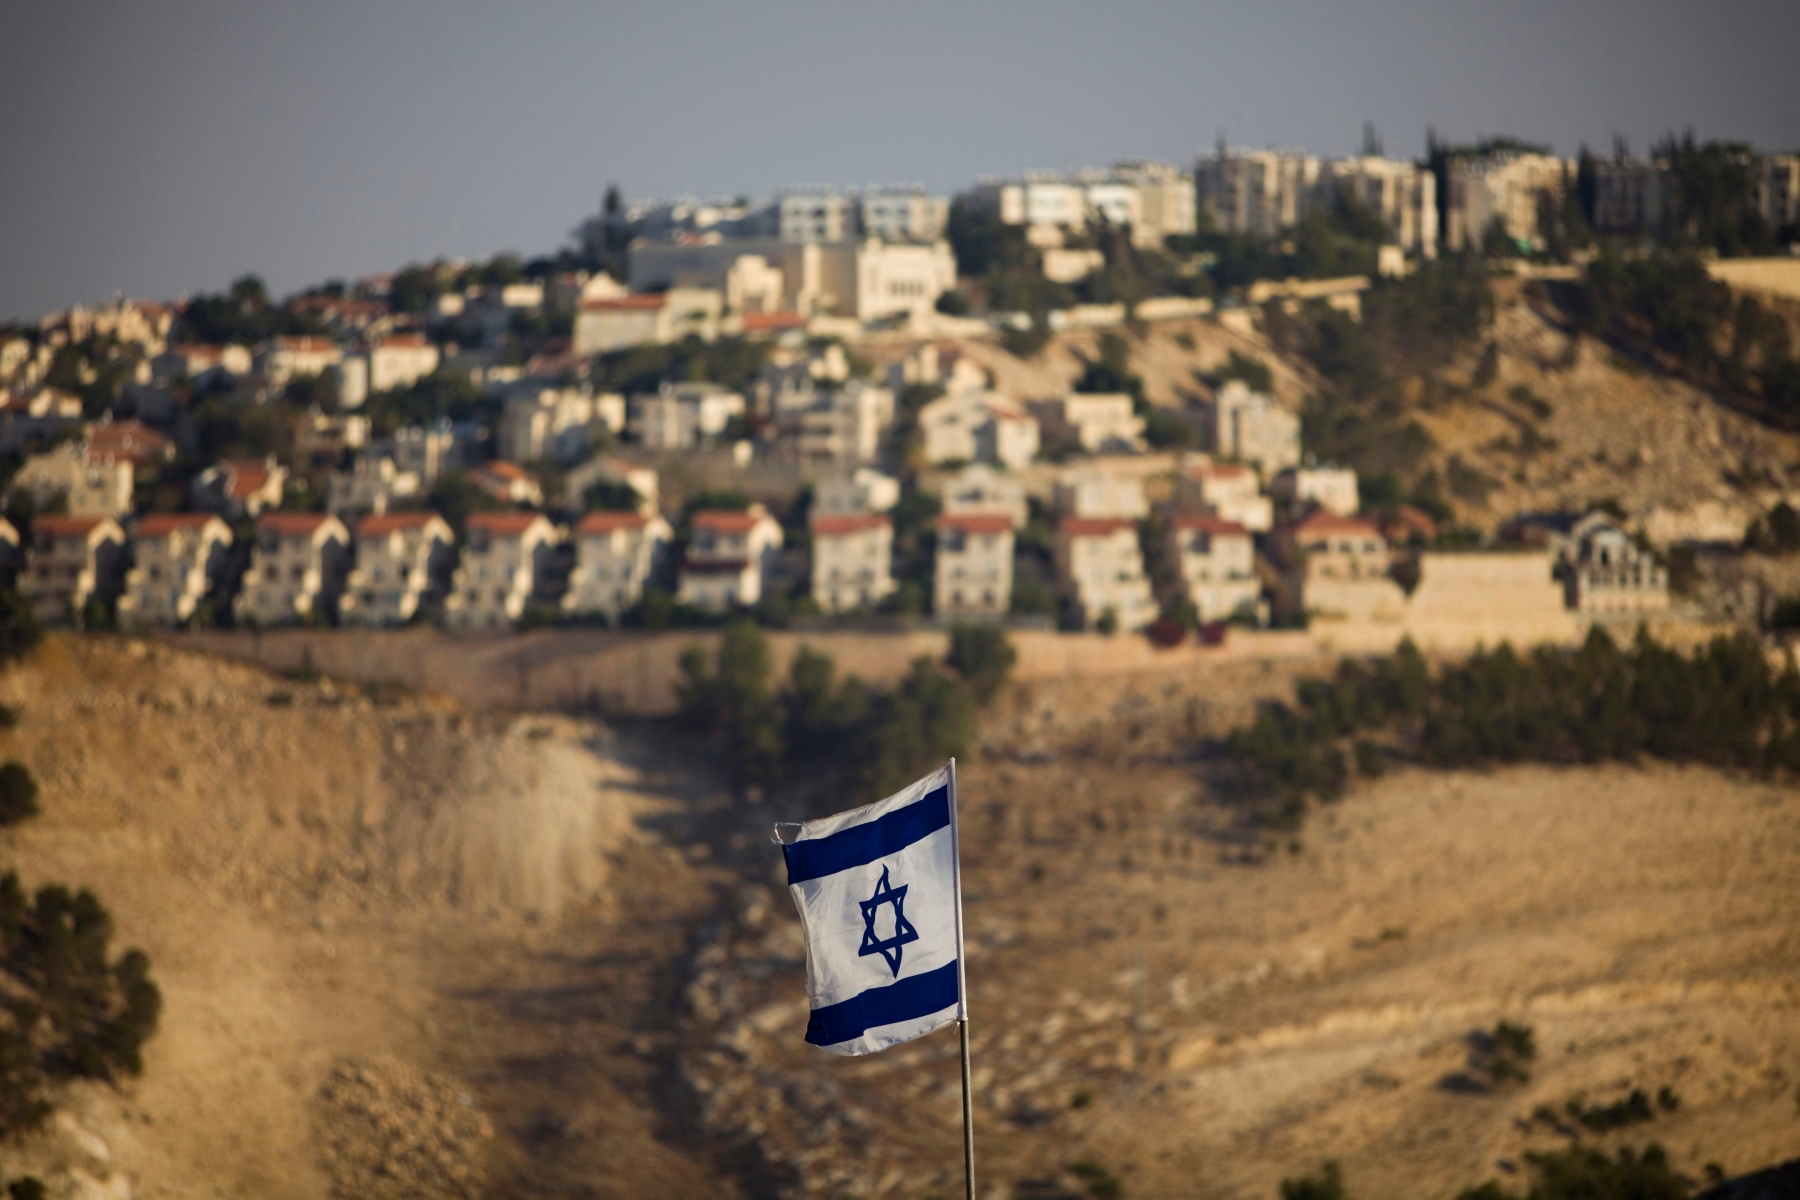 FILE - In this Monday, Sept. 7, 2009 file photo, an Israeli flag is seen in front of the West Bank Jewish settlement of Maaleh Adumim on the outskirts of Jerusalem. The European Union on Wednesday, Nov. 11, 2015 approved guidelines for its member states to specially label products made in West Bank settlements, a move that has already been criticized by Israel. (AP Photo/Bernat Armangue, File) Mideast Europe Israel